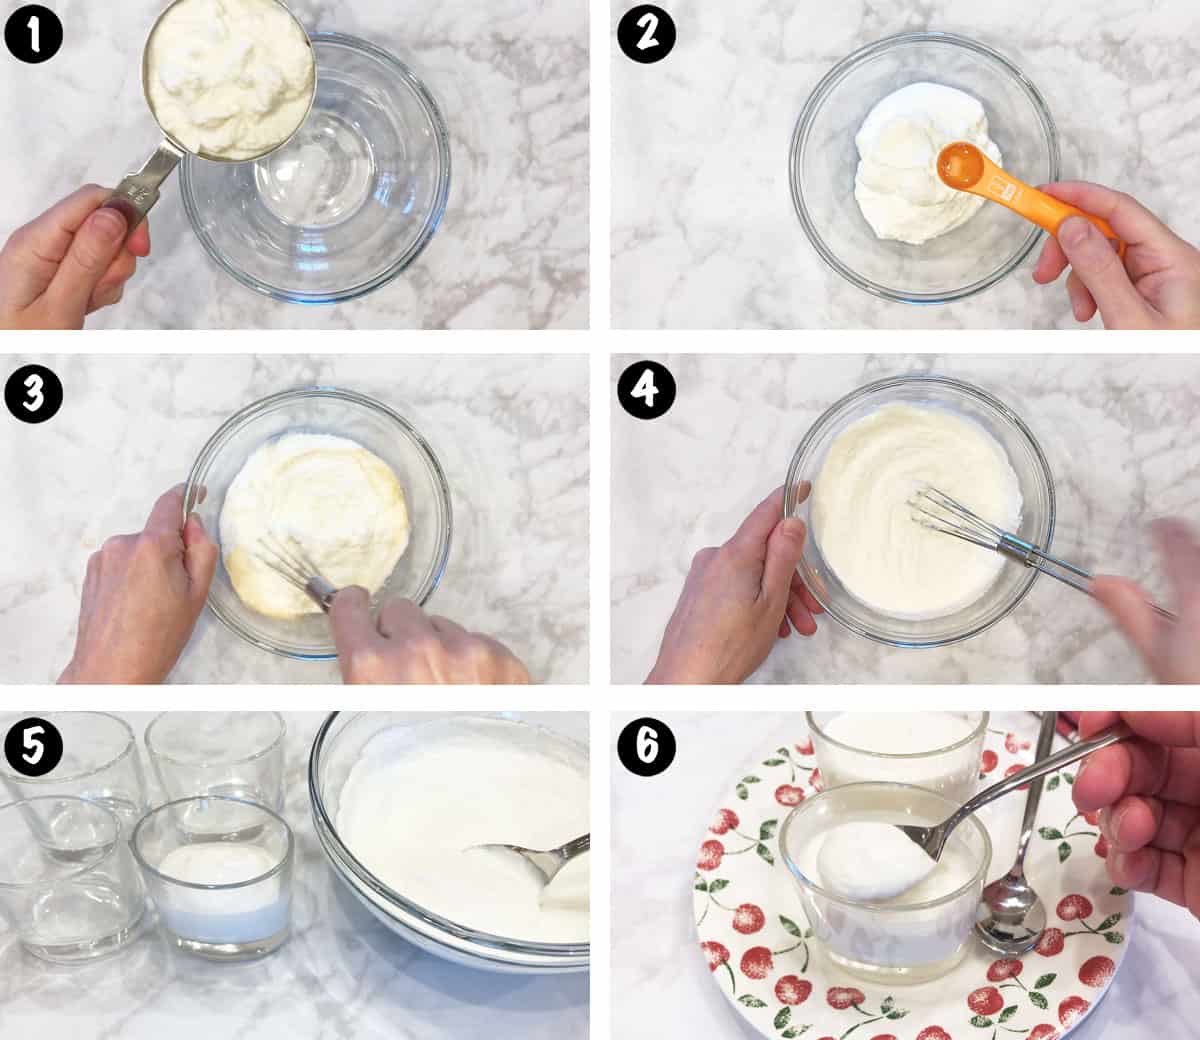 A photo collage showing the steps for making a ricotta dessert. 